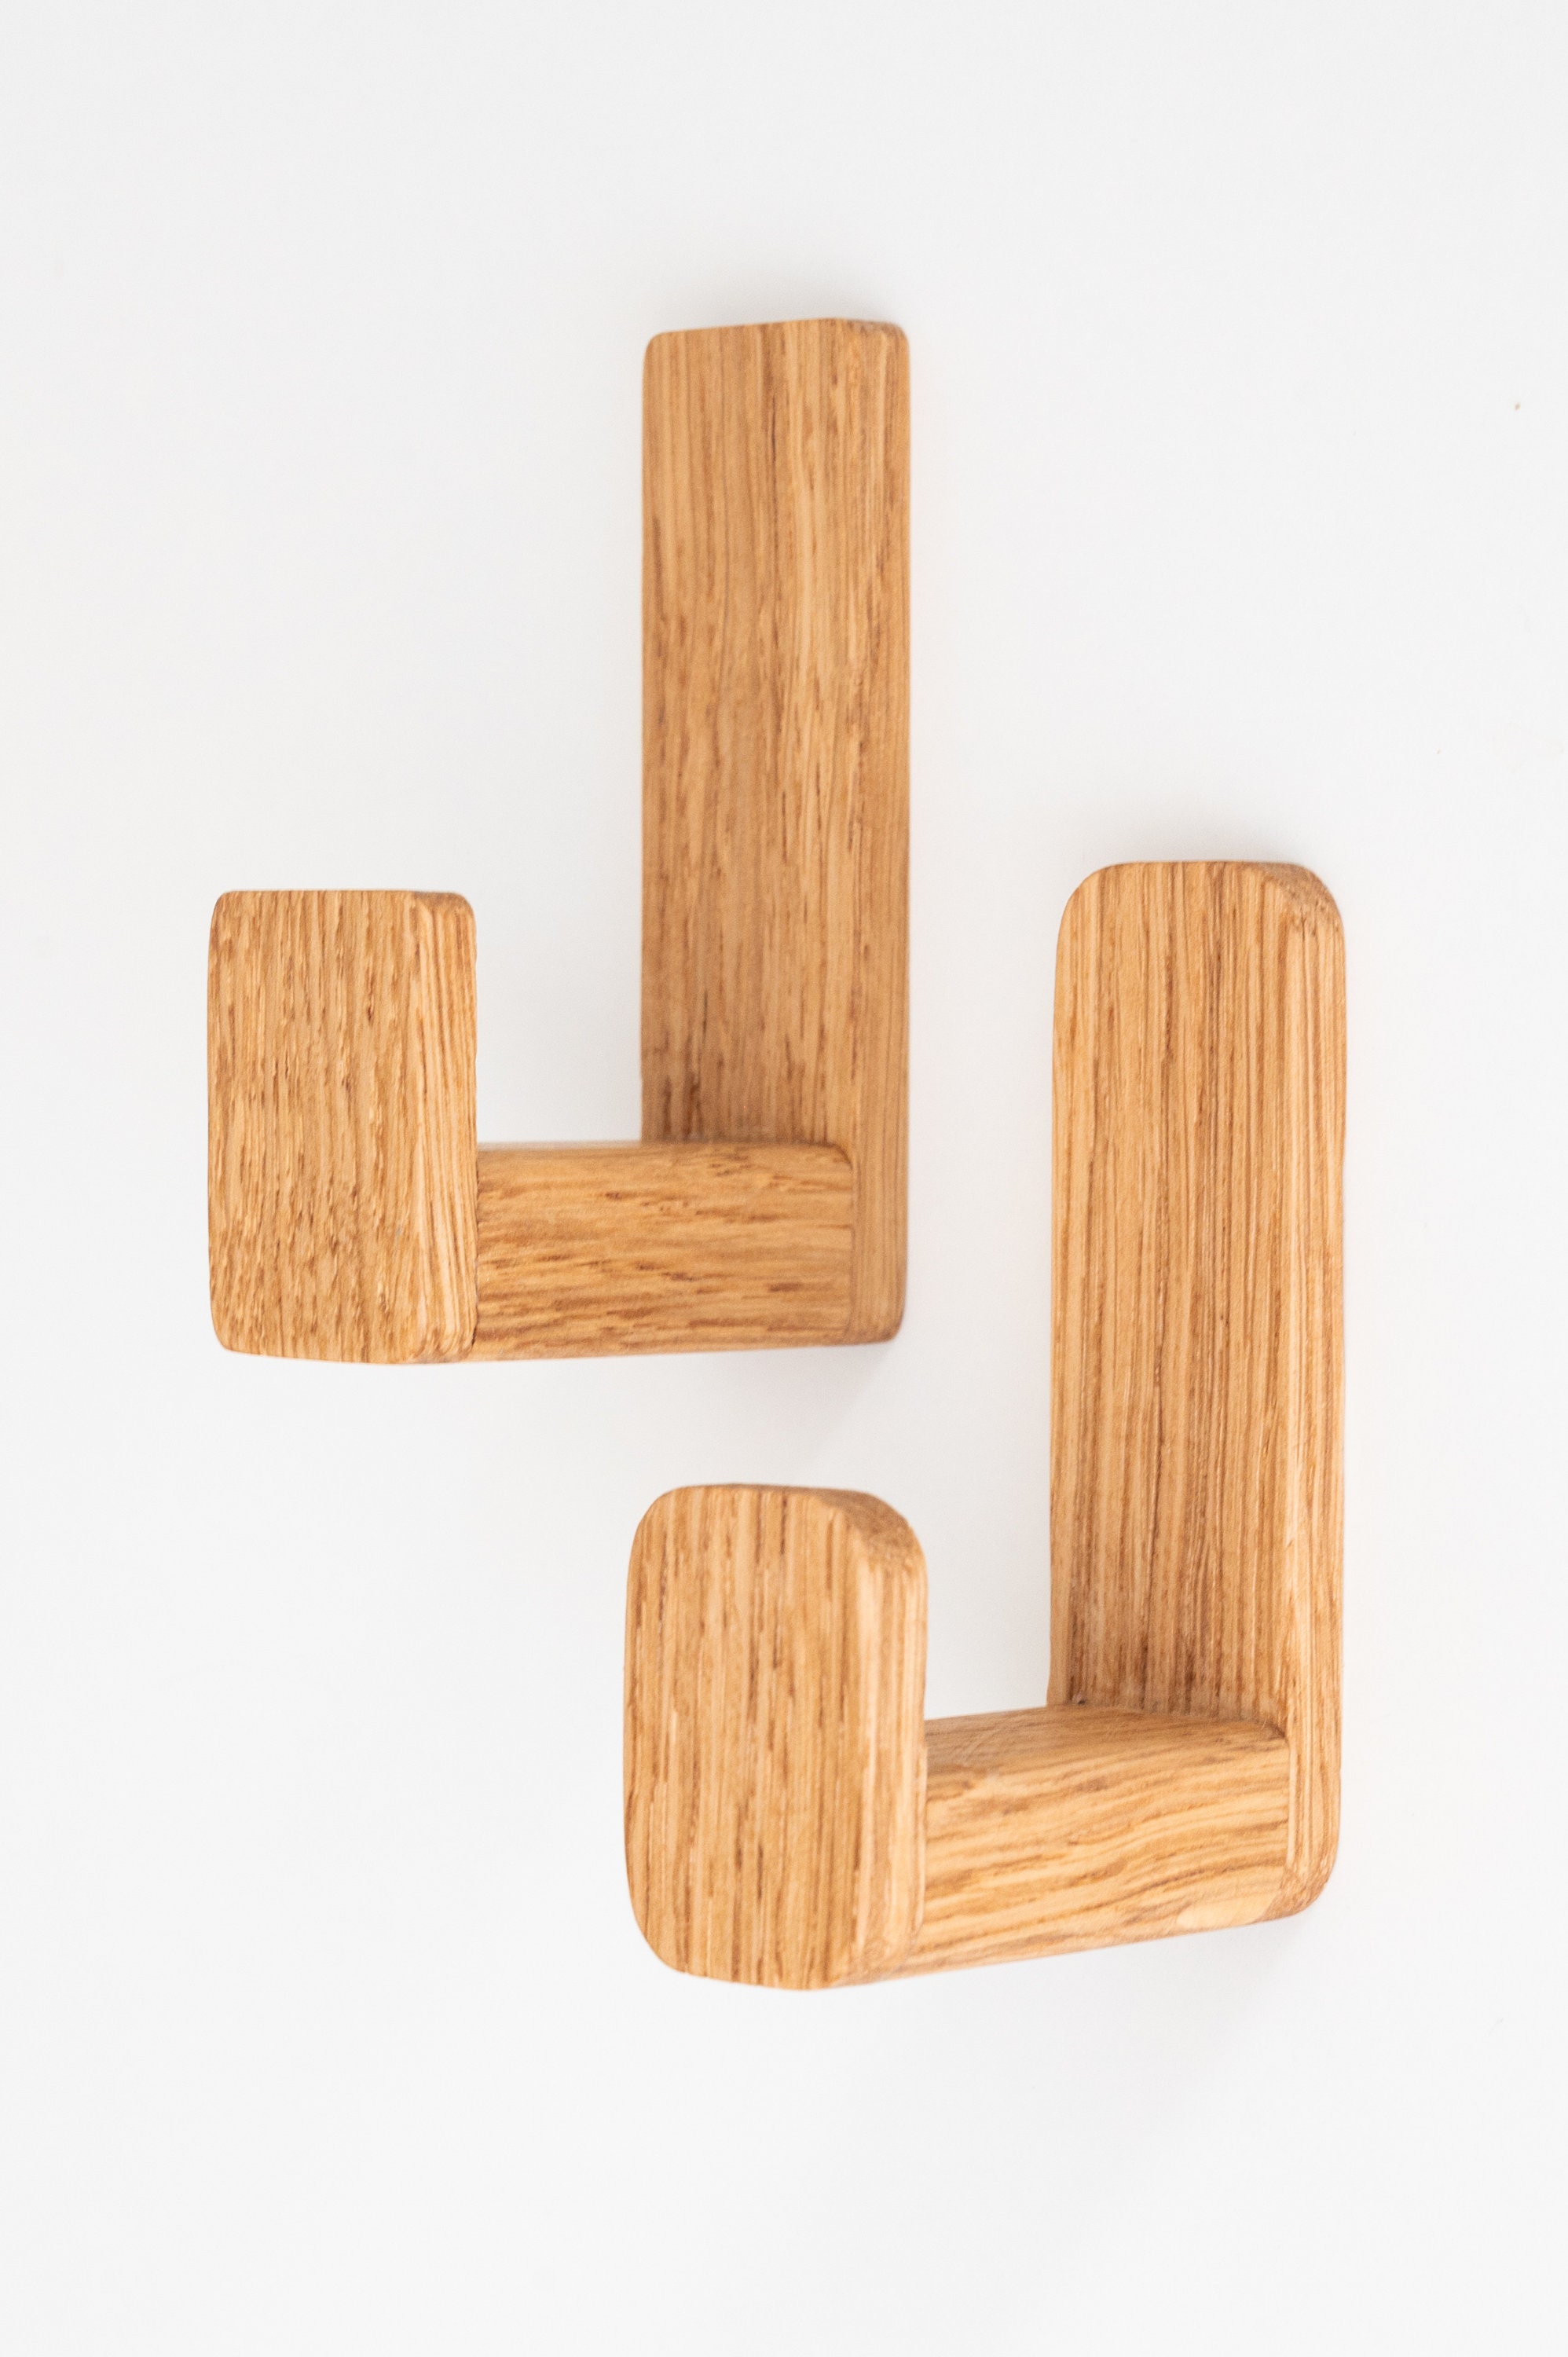 Self-adhesive Oak Wooden Wall Hook in 4 Different Styles, Danish